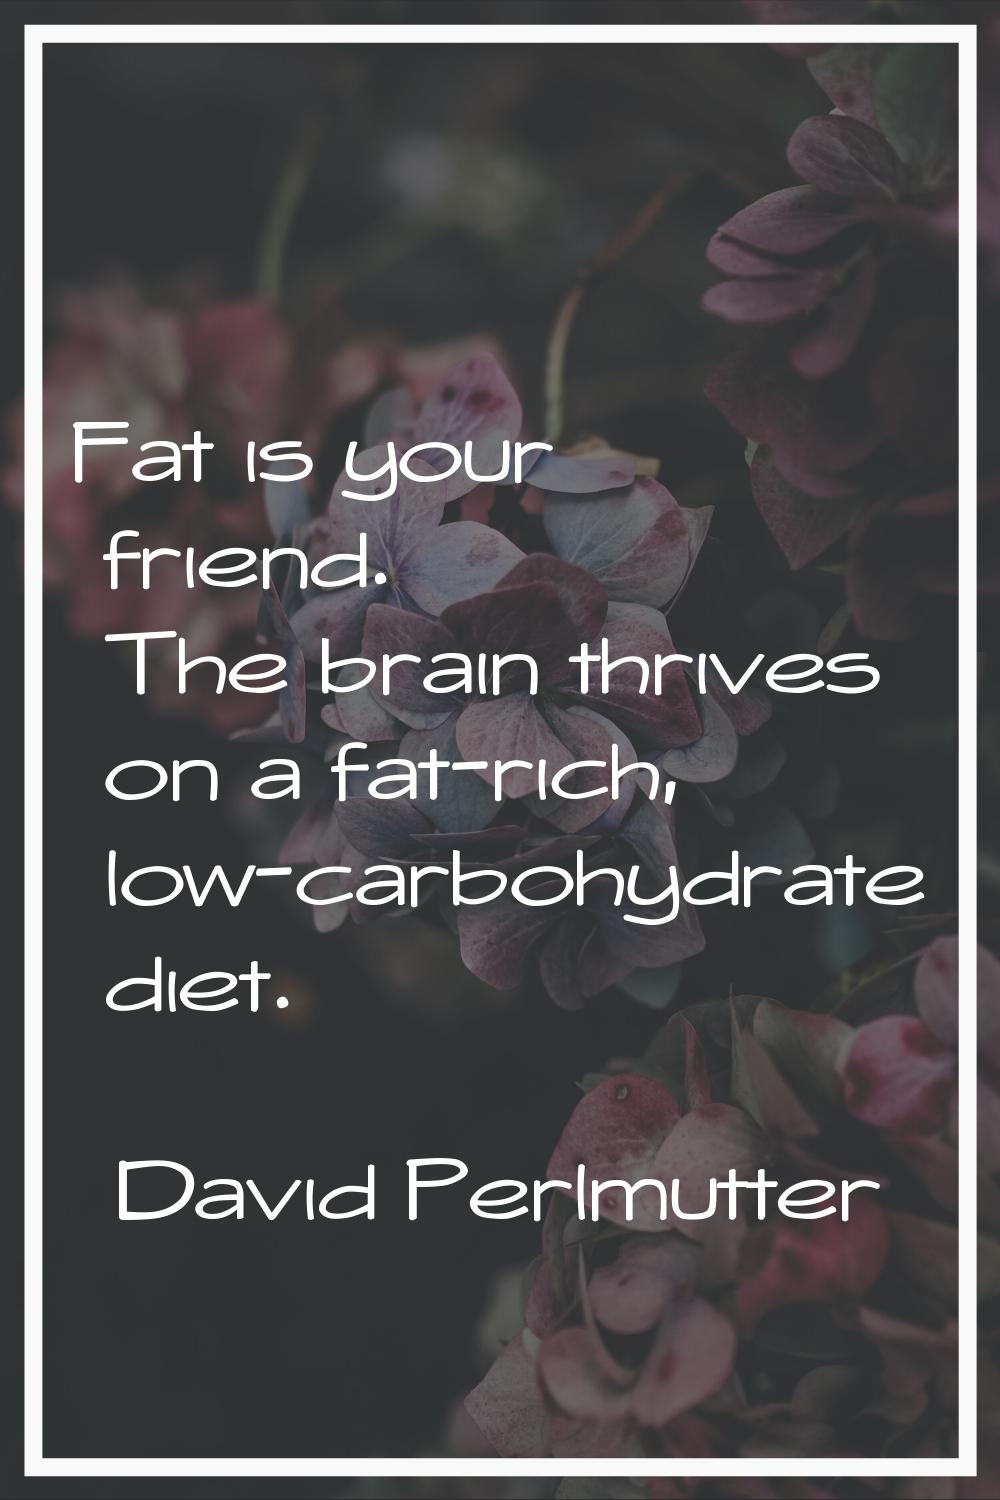 Fat is your friend. The brain thrives on a fat-rich, low-carbohydrate diet.